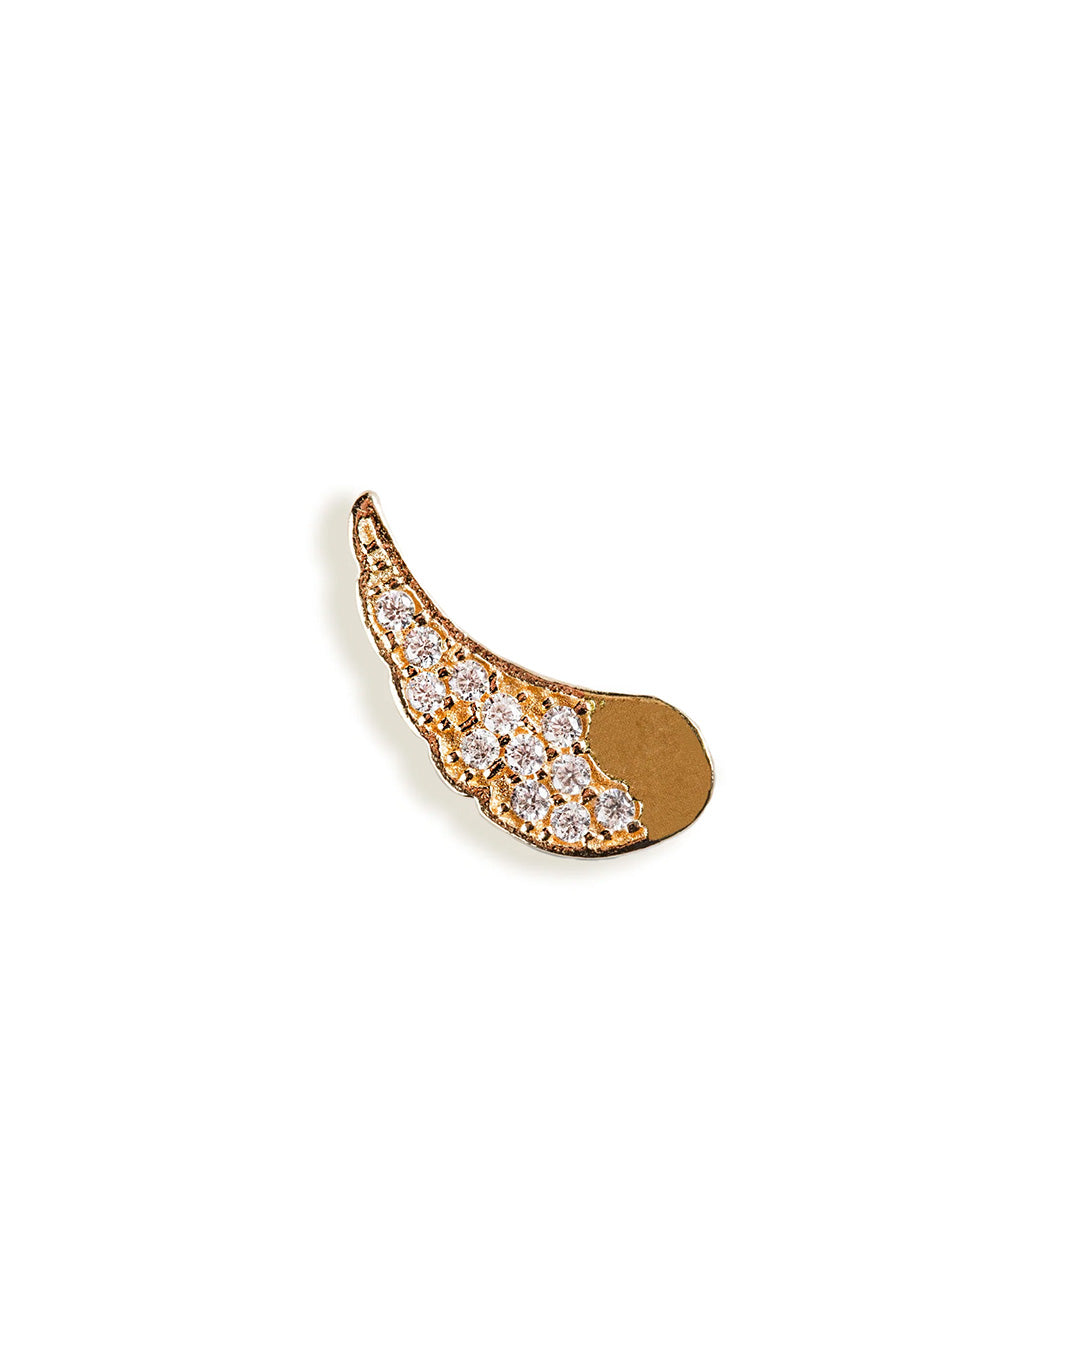 WING PIERCING WITH CRYSTALS SET IN 14K YELLOW GOLD